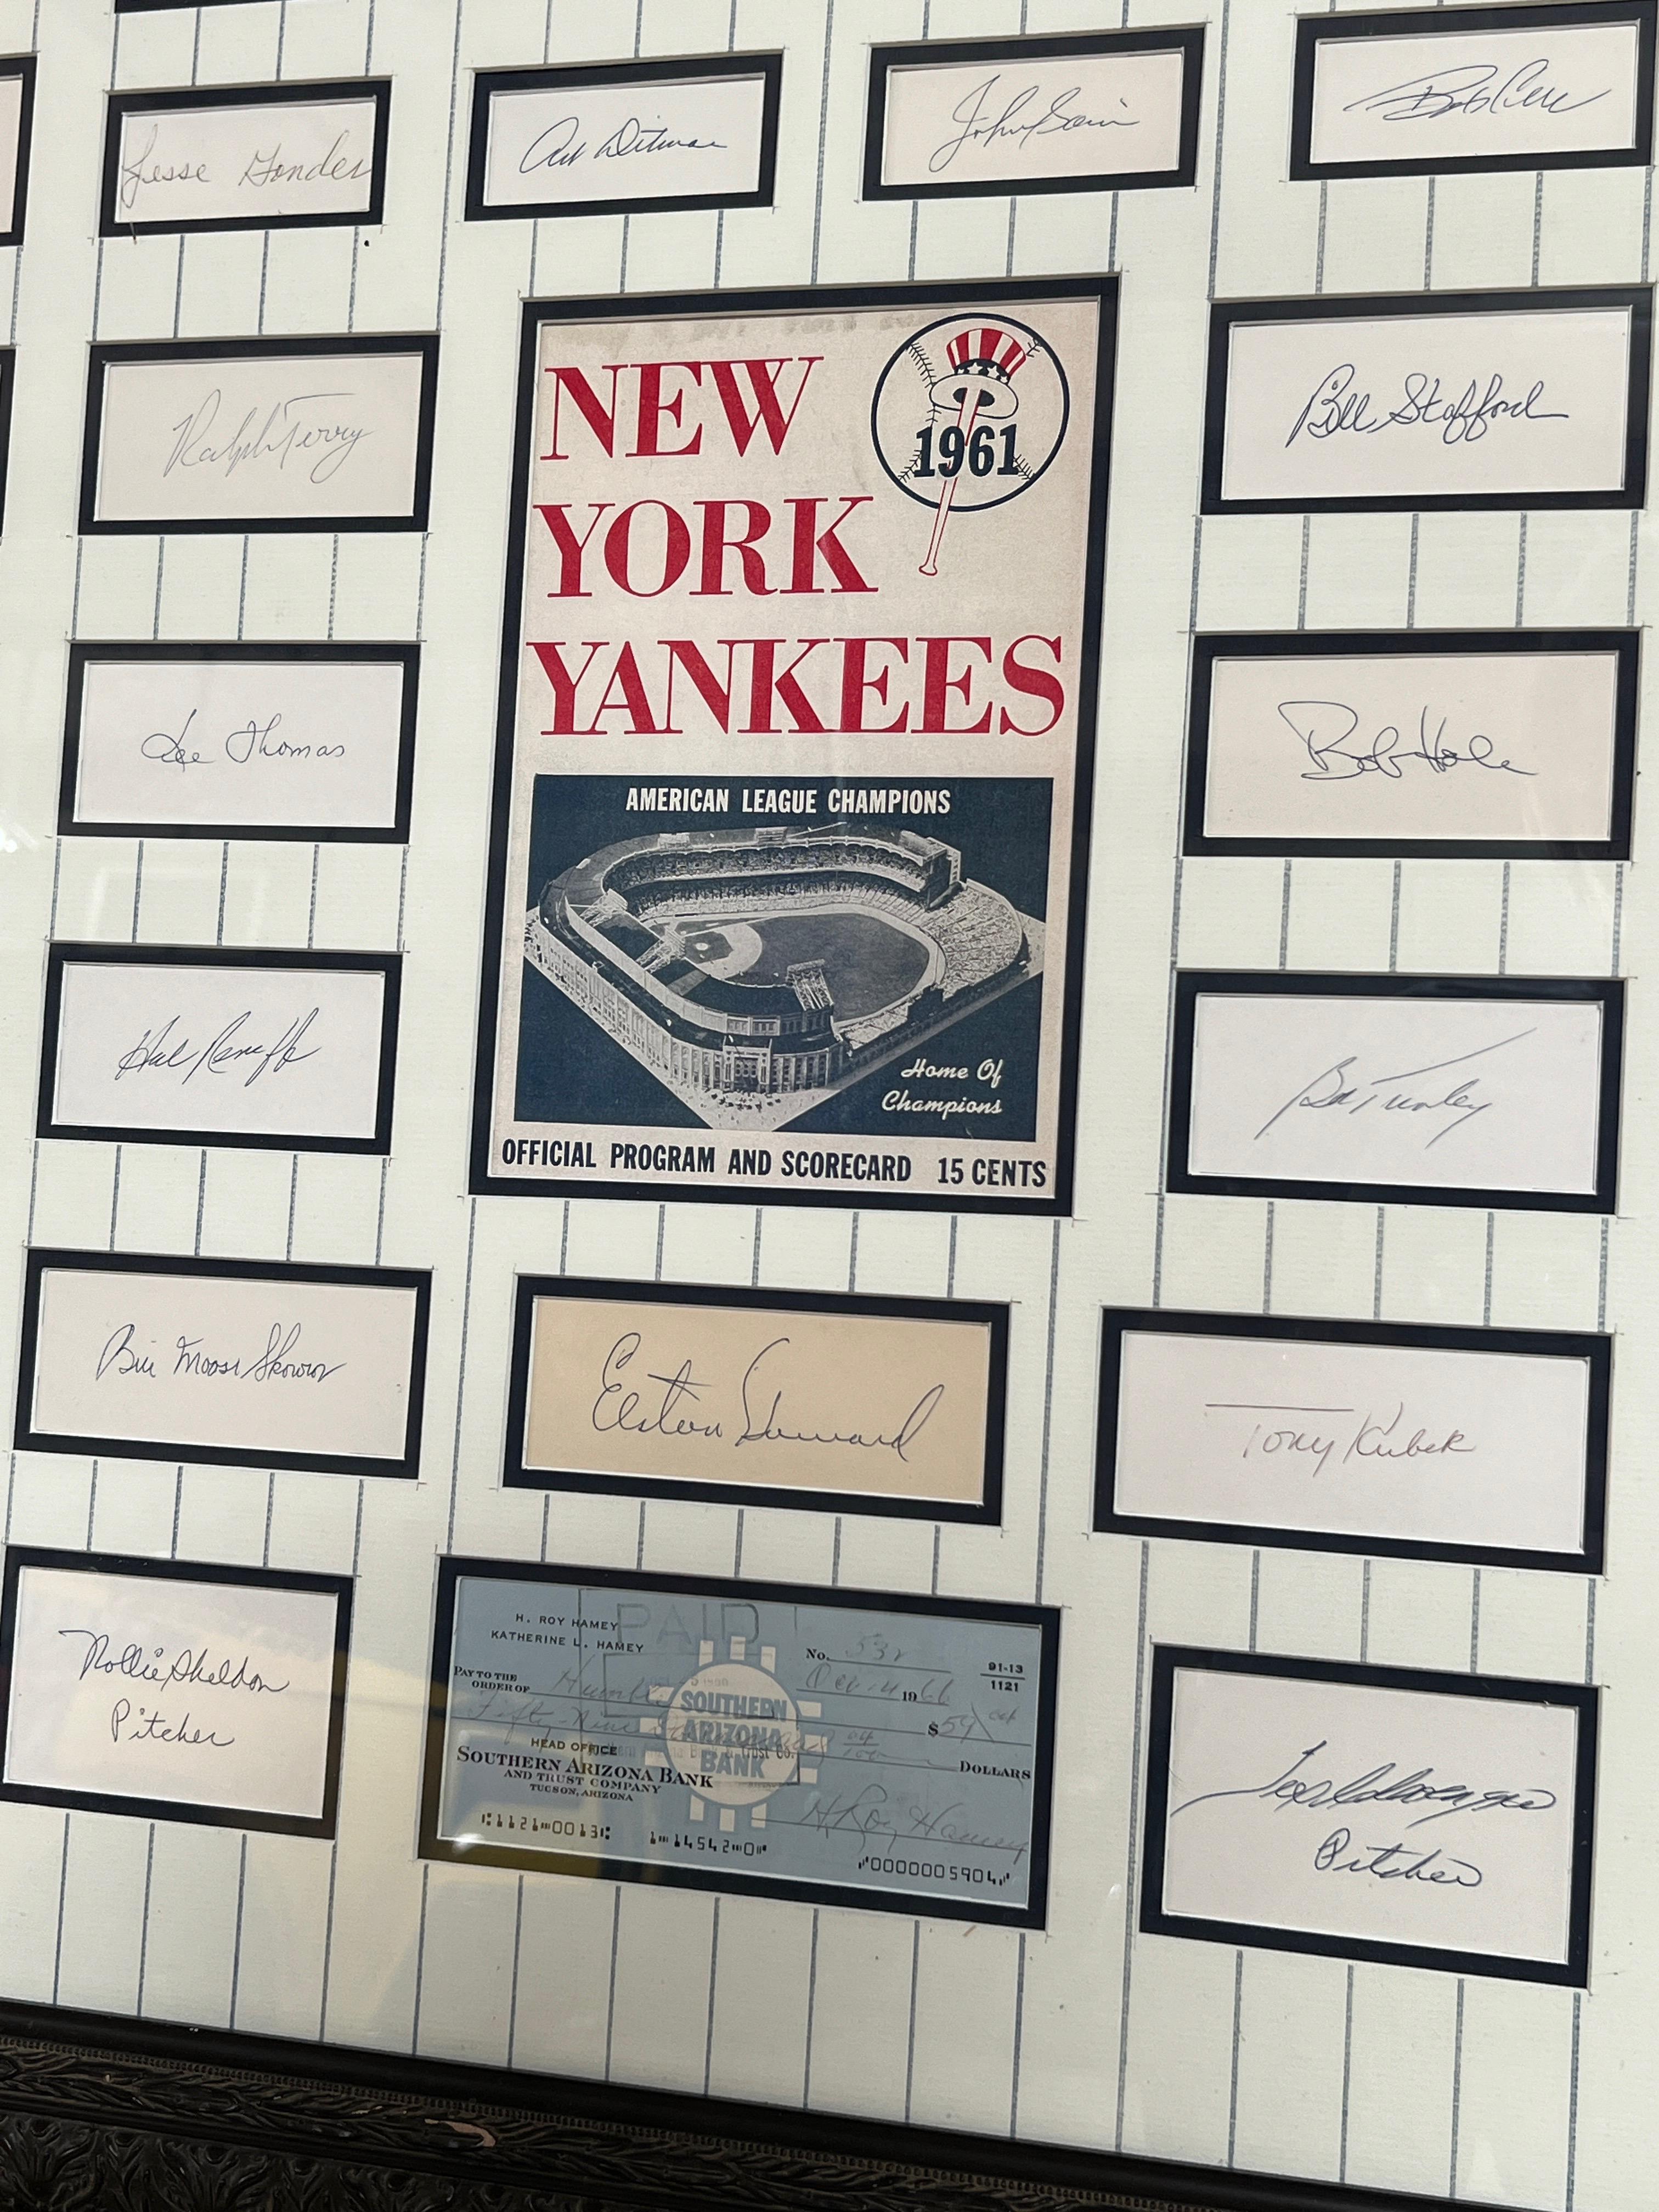 1961 NEW YORK YANKEES TEAM SIGNED LARGE DISPLAY WITH BECKETT LETTER OF AUTHENTICITY